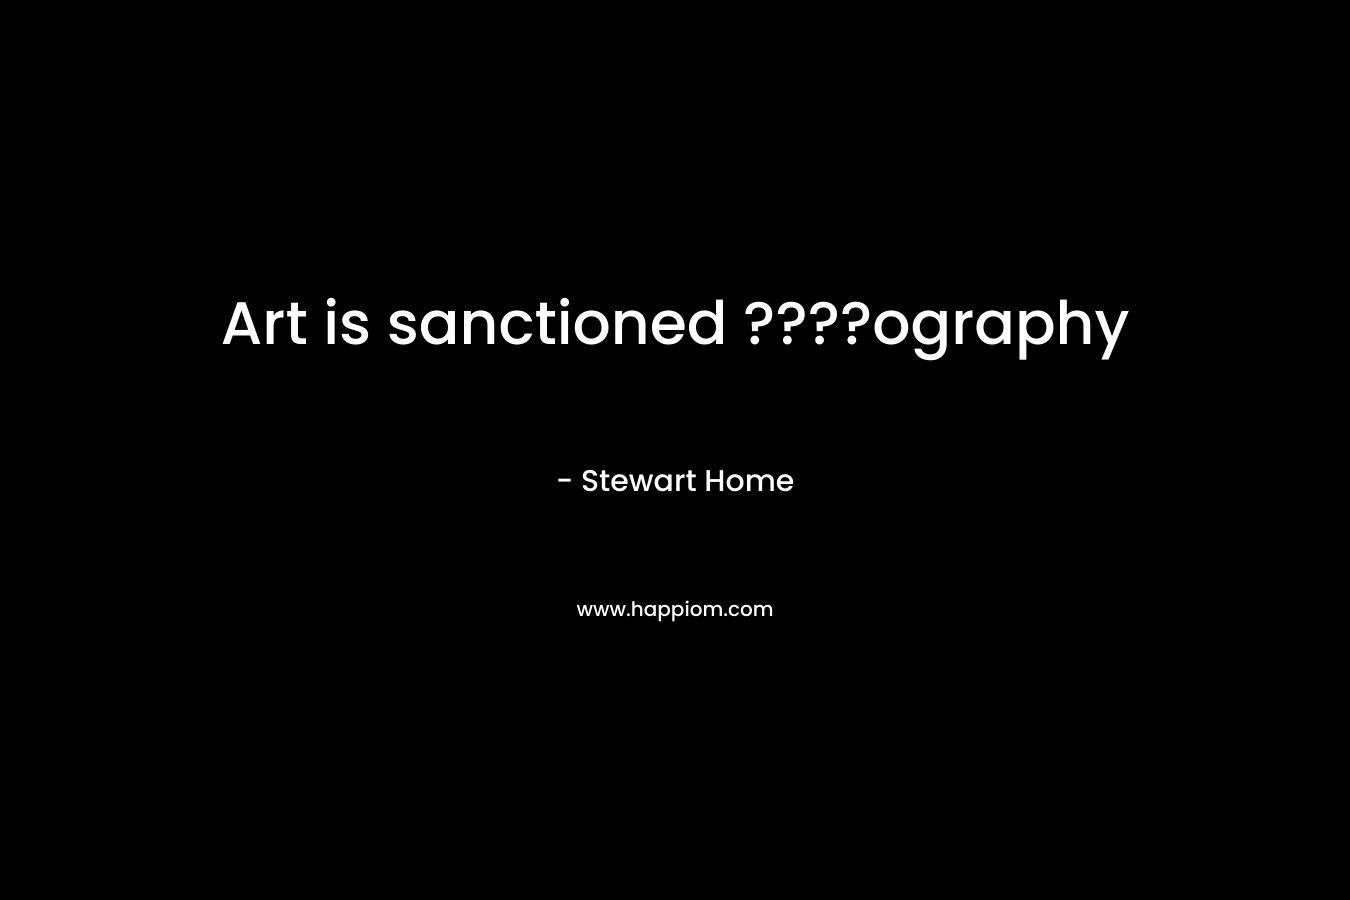 Art is sanctioned ????ography – Stewart Home